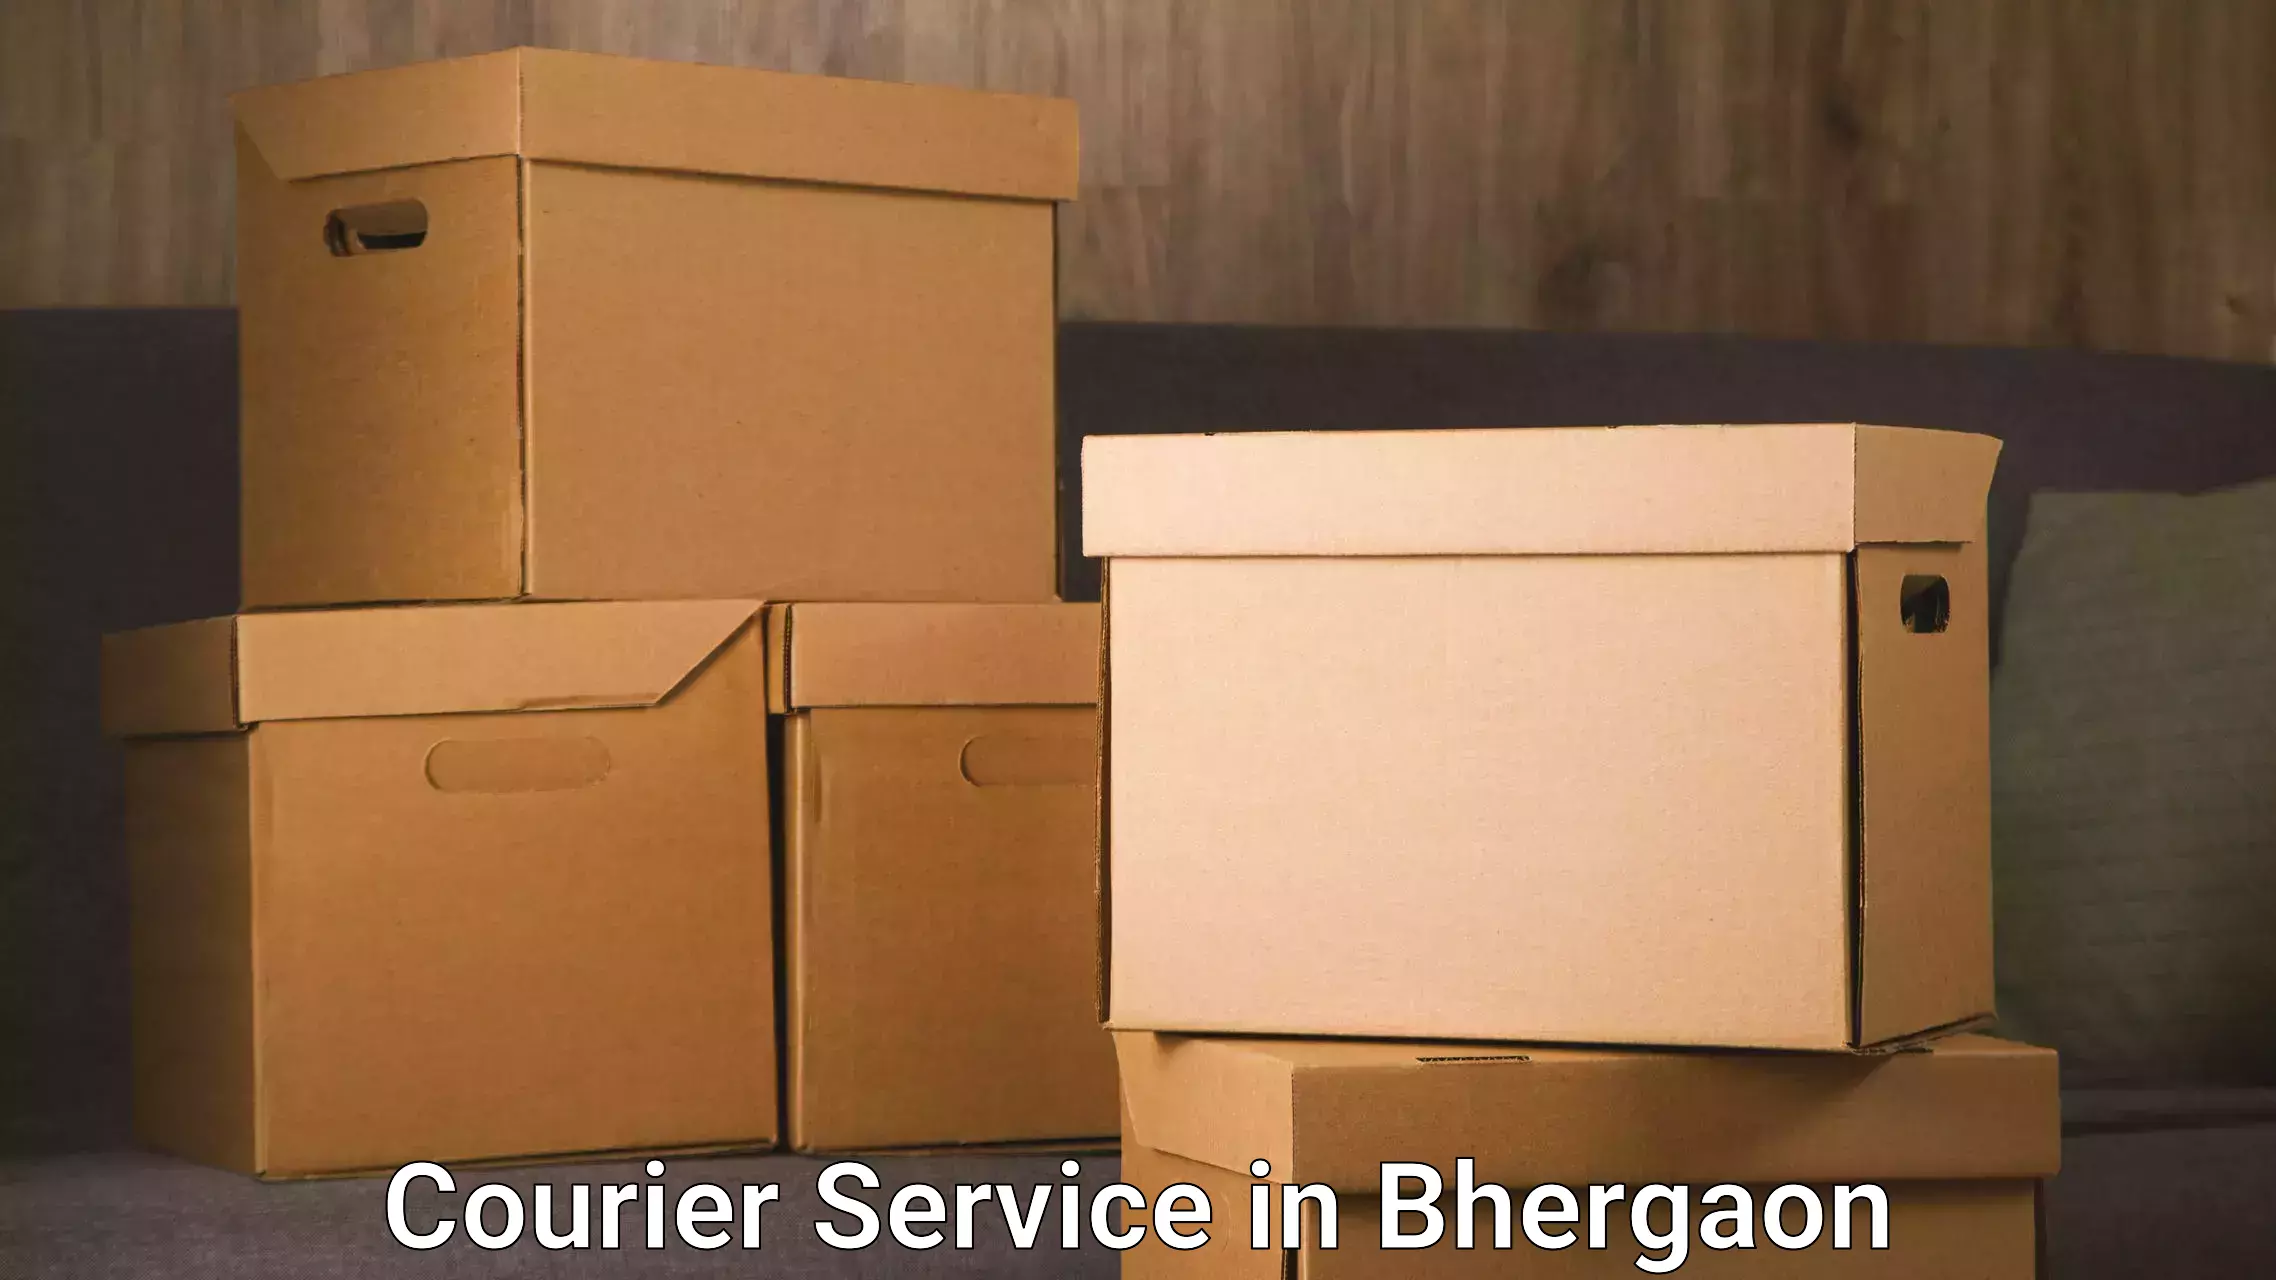 Express postal services in Bhergaon